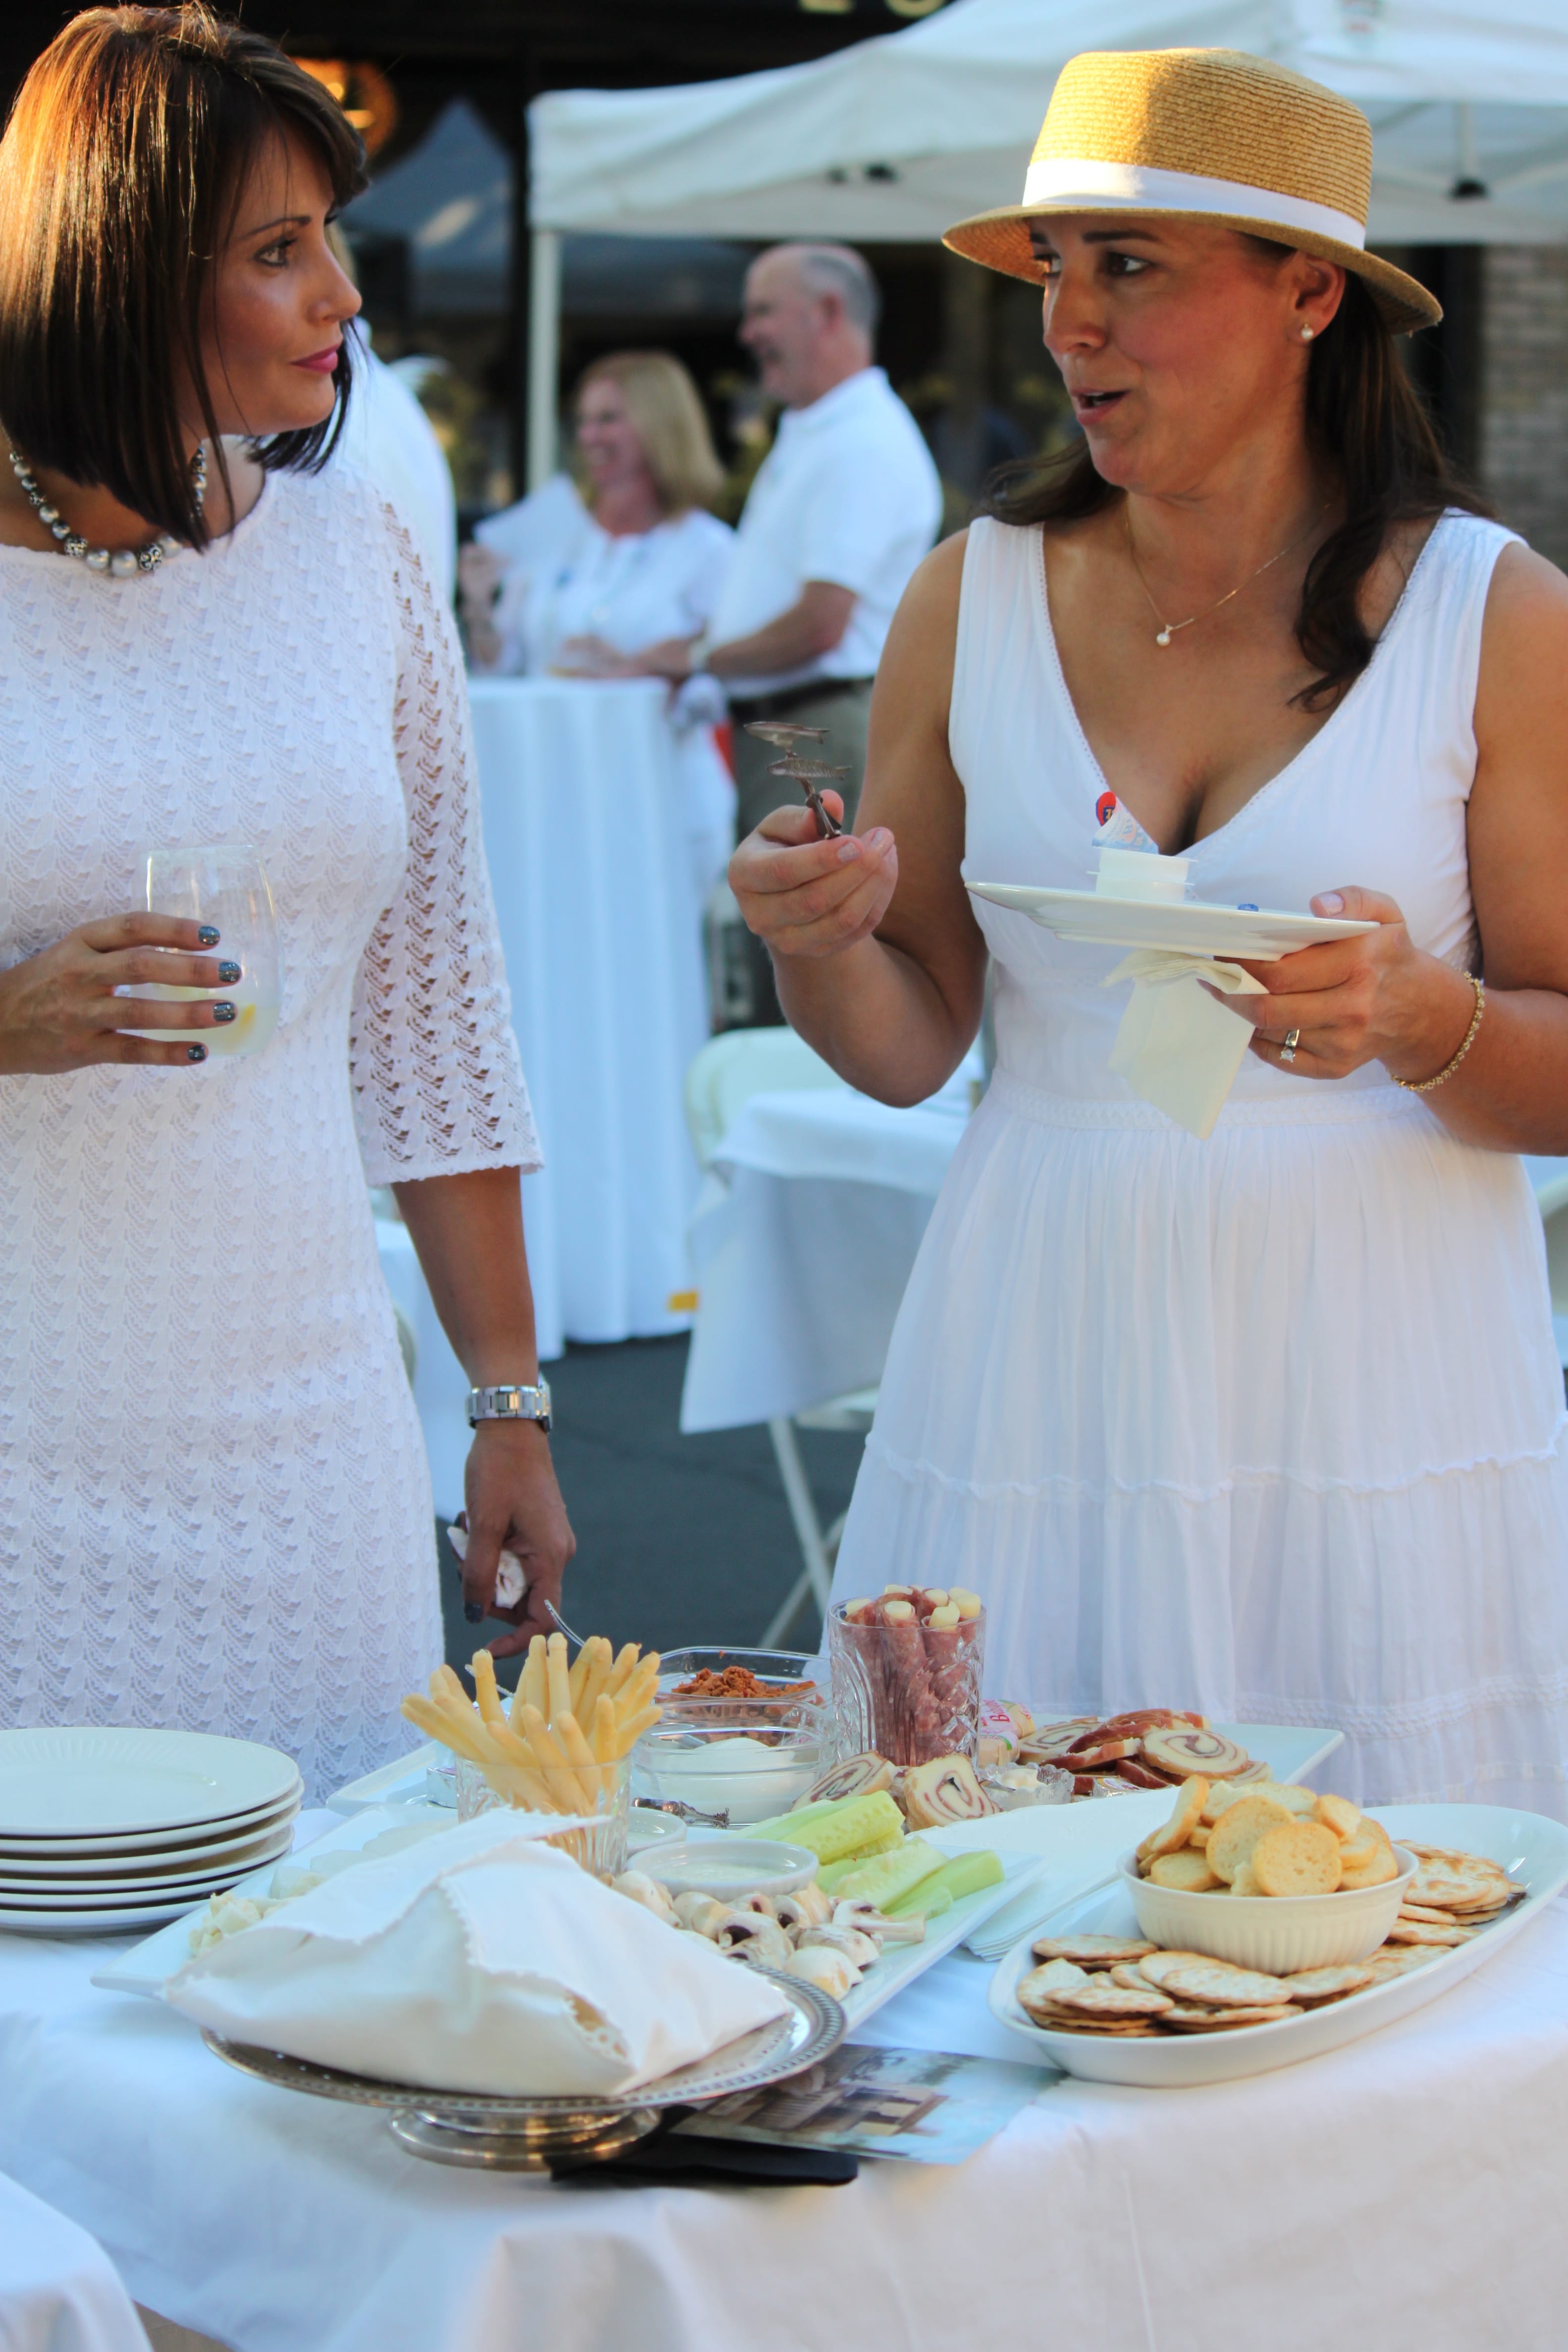 Before dinner, party-goers dined on appetizers and cocktails. The meal began with a traditional napkin wave at 7 p.m. The &quot;diner en blanc&quot; concept was first made famous in Paris. Similar events are now held throughout Europe, and in U.S.